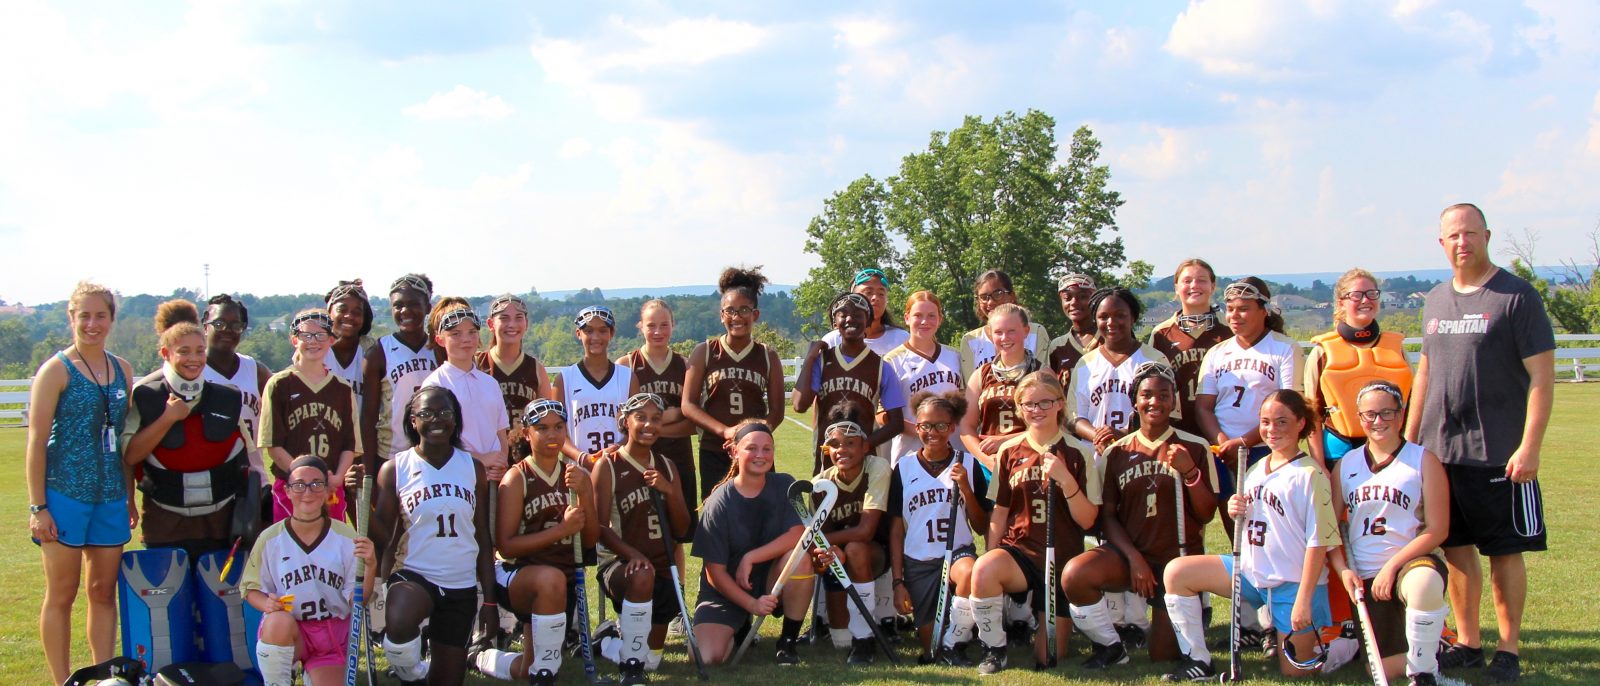 MHS field hockey team picture